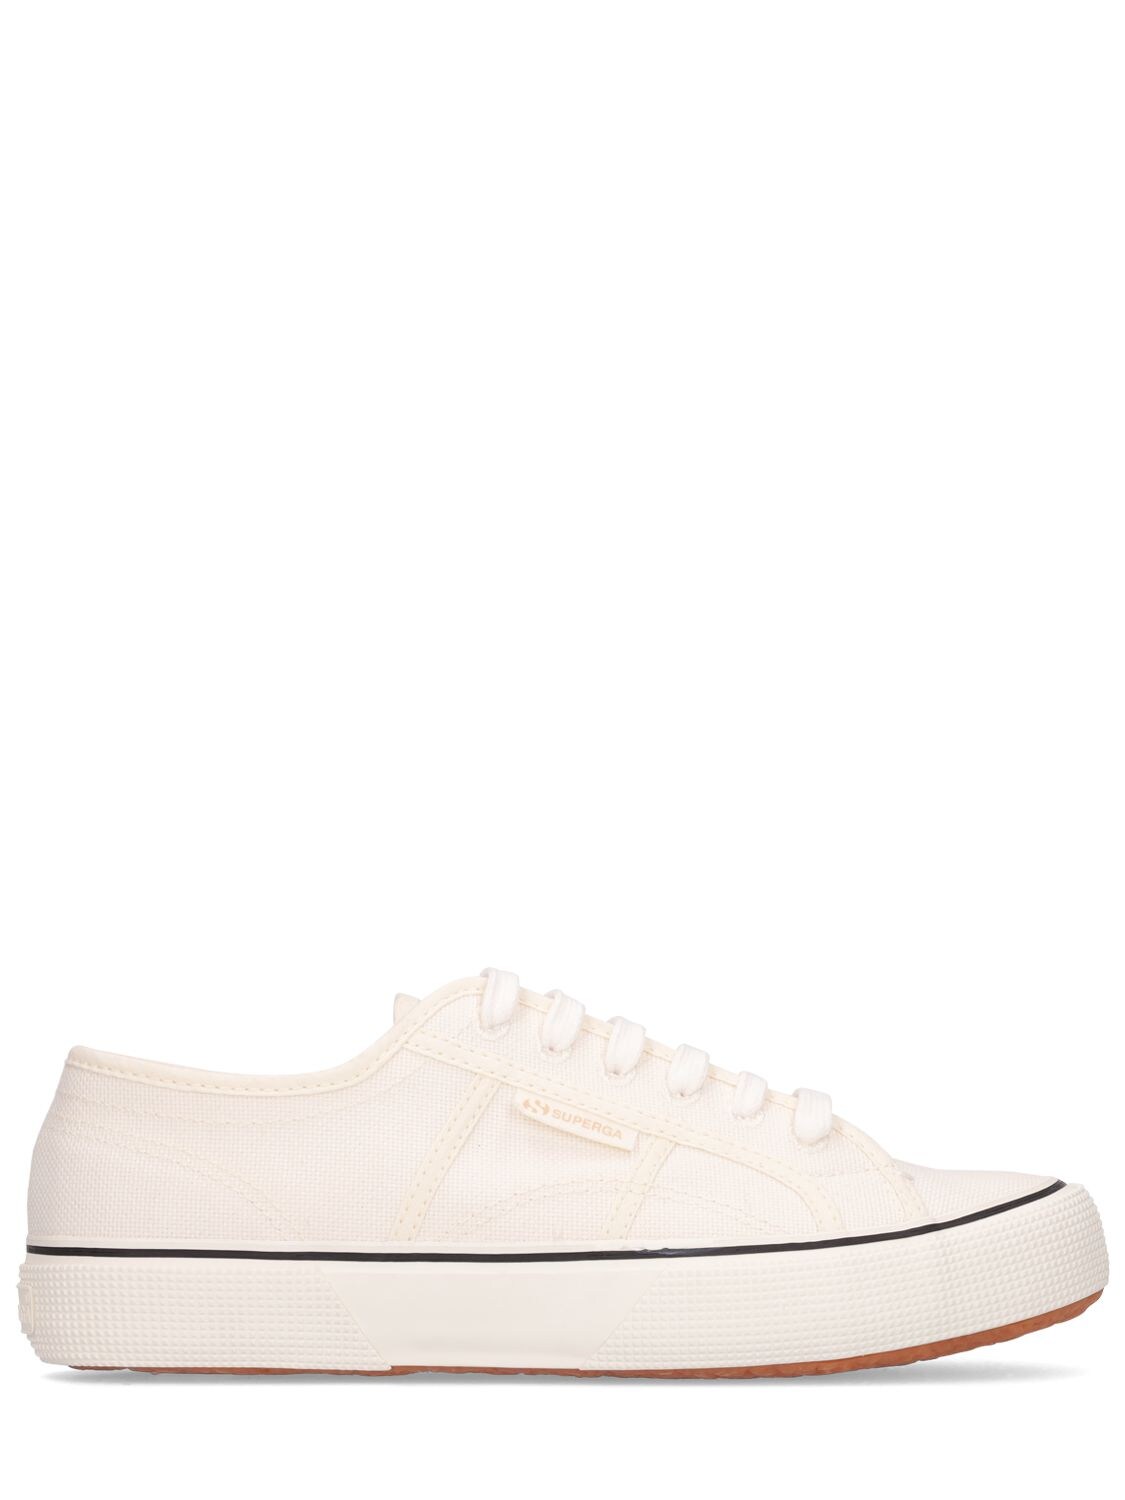 Superga Women's Organic Cotton Canvas Low Top Sneakers In Off-white